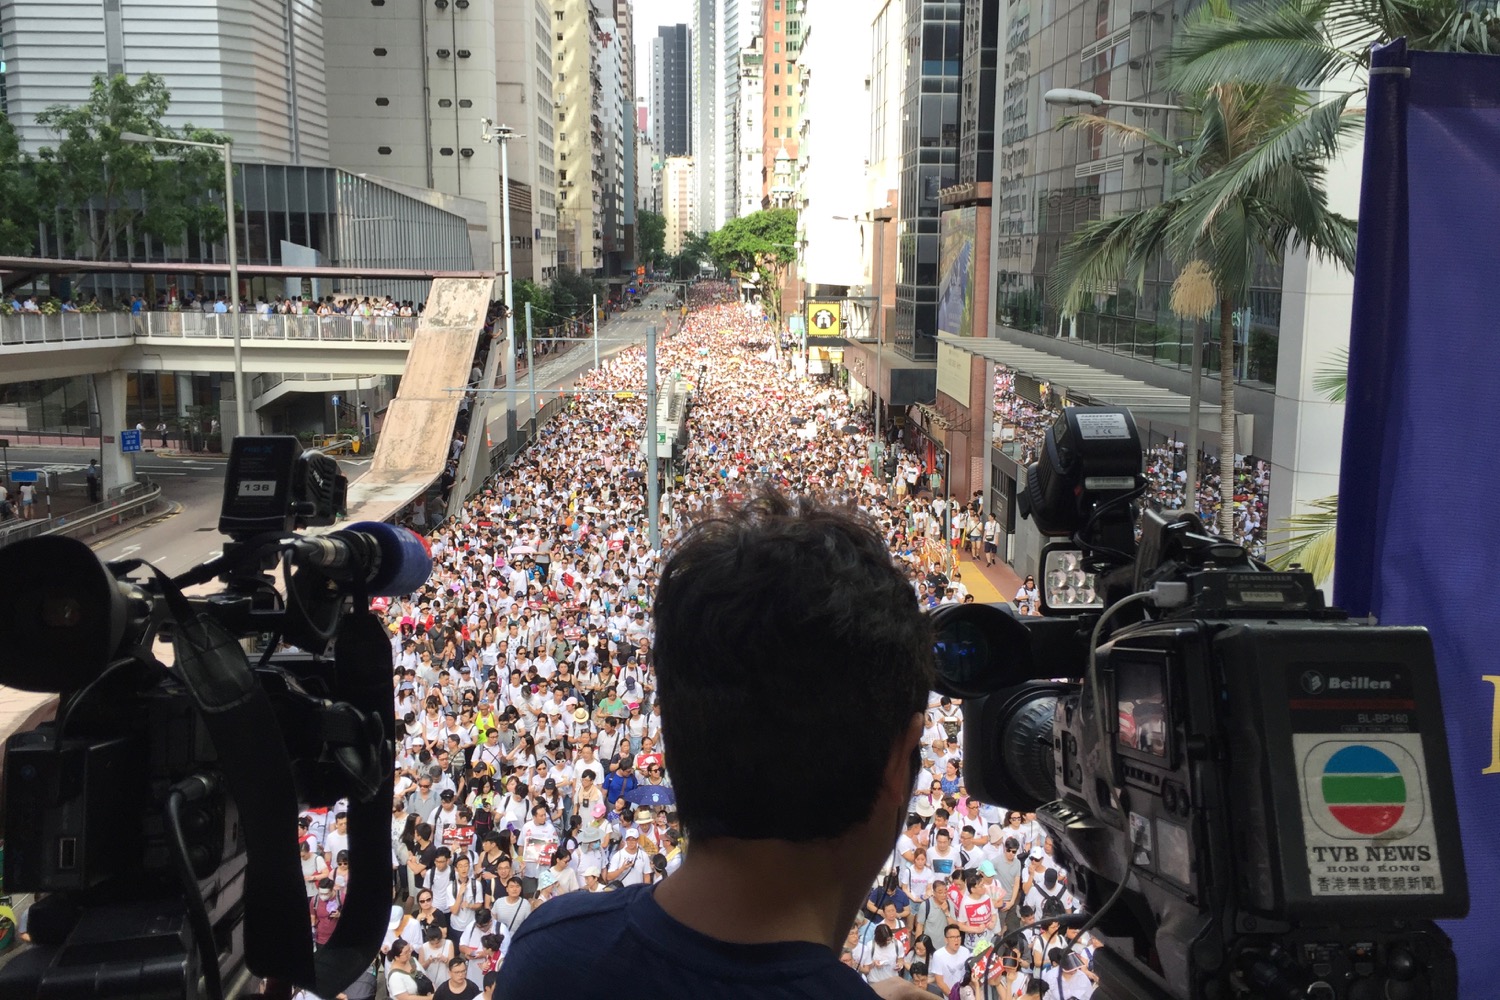 Hundreds of thousands of protesters march through Hong Kong in June to protest a controversial extradition bill. Photo by Stuart White.